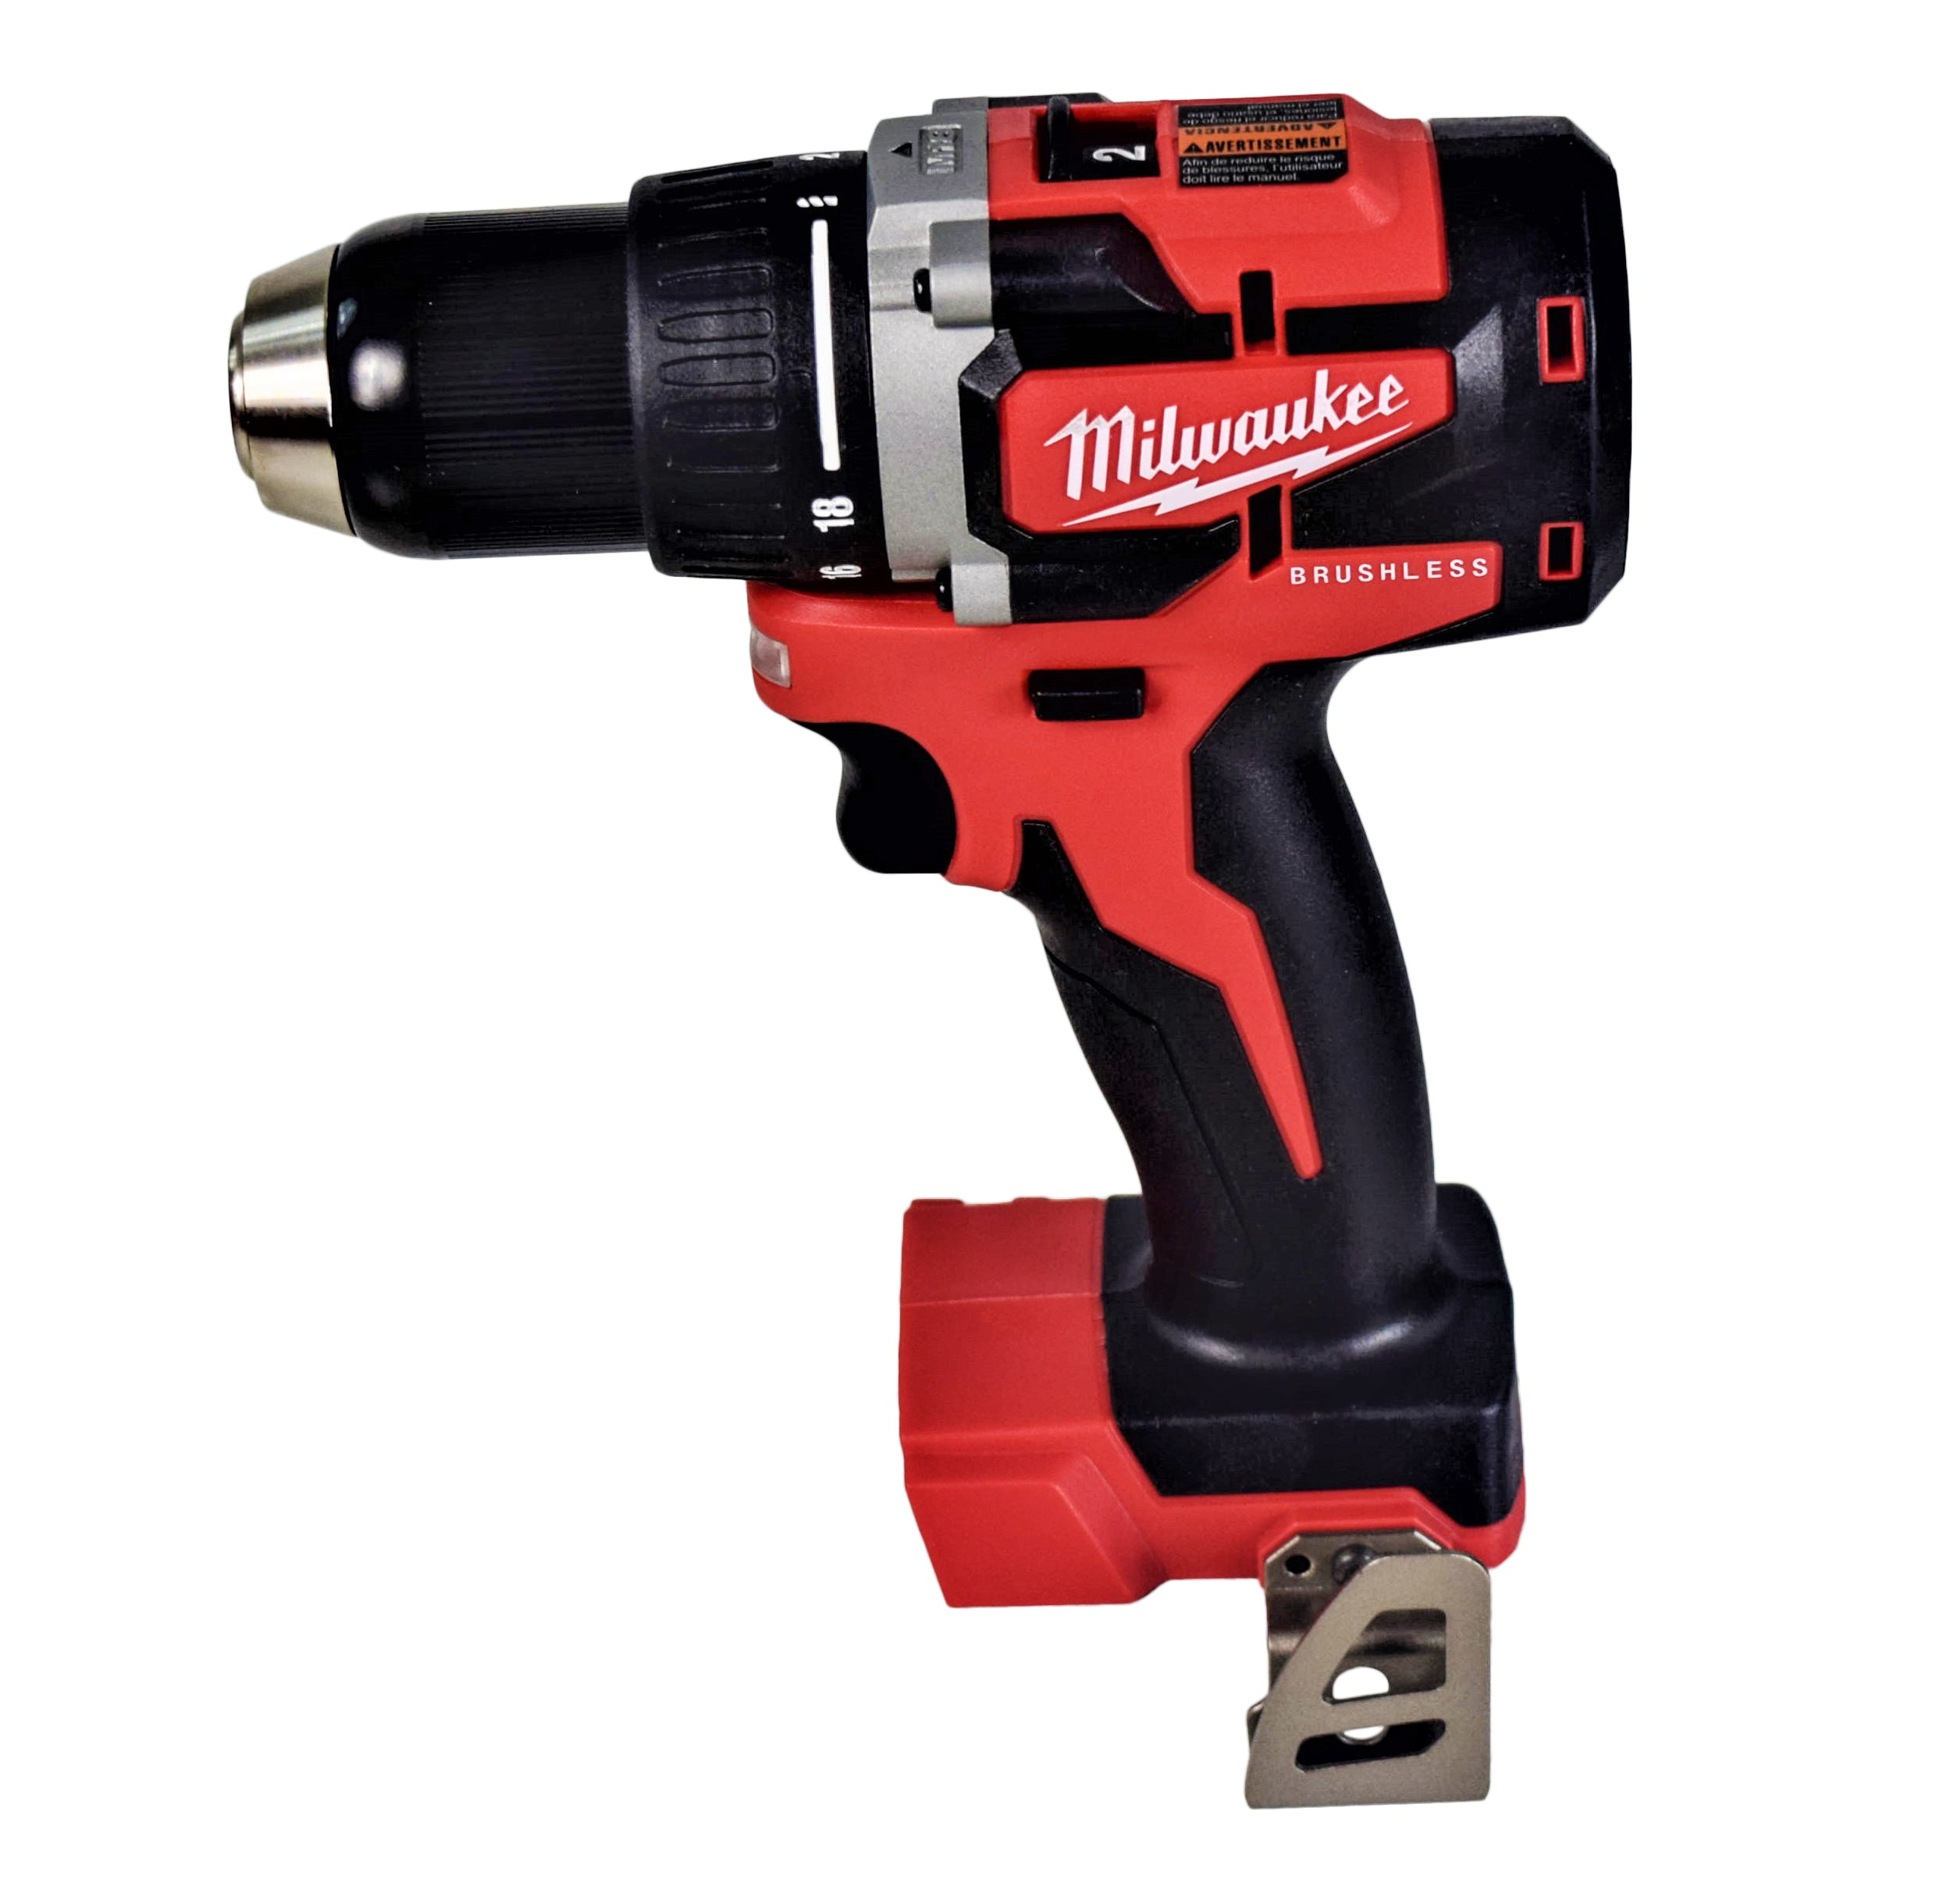 Milwaukee-2801-21P-M18-18-Volt-Lithium-Ion-Compact-Brushless-Cordless-1-2-in.-Drill-Driver-Kit-image-5